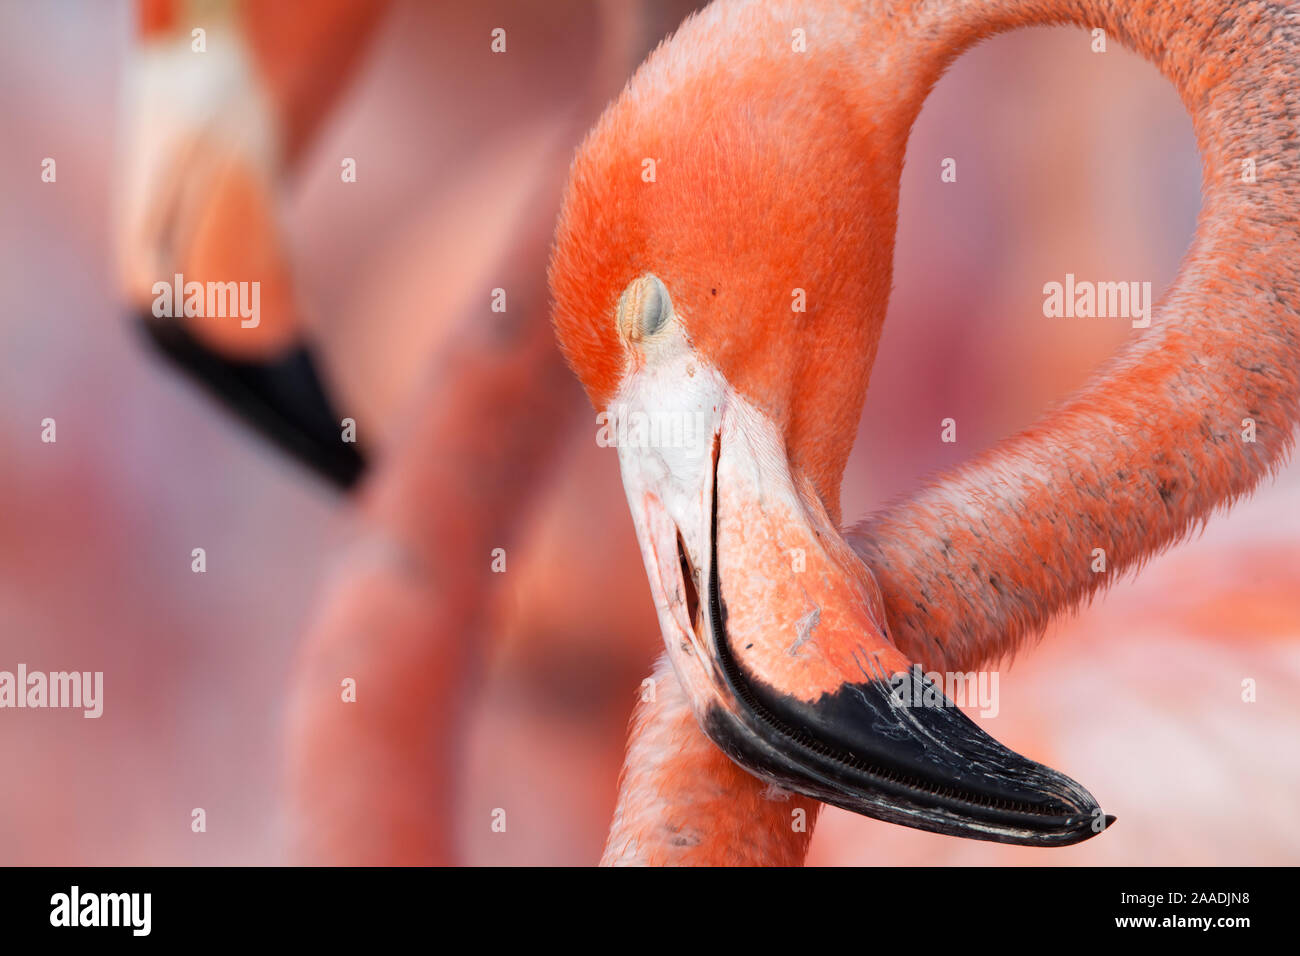 Caribbean Flamingo (Phoenicopterus ruber) sleeping in the breeding colony, brooding egg, Ria Lagartos Biosphere Reserve, Yucatan Peninsula, Mexico, June, Finalist in the Portfolio Category of the Terre Sauvage Nature Images Awards 2017. Stock Photo